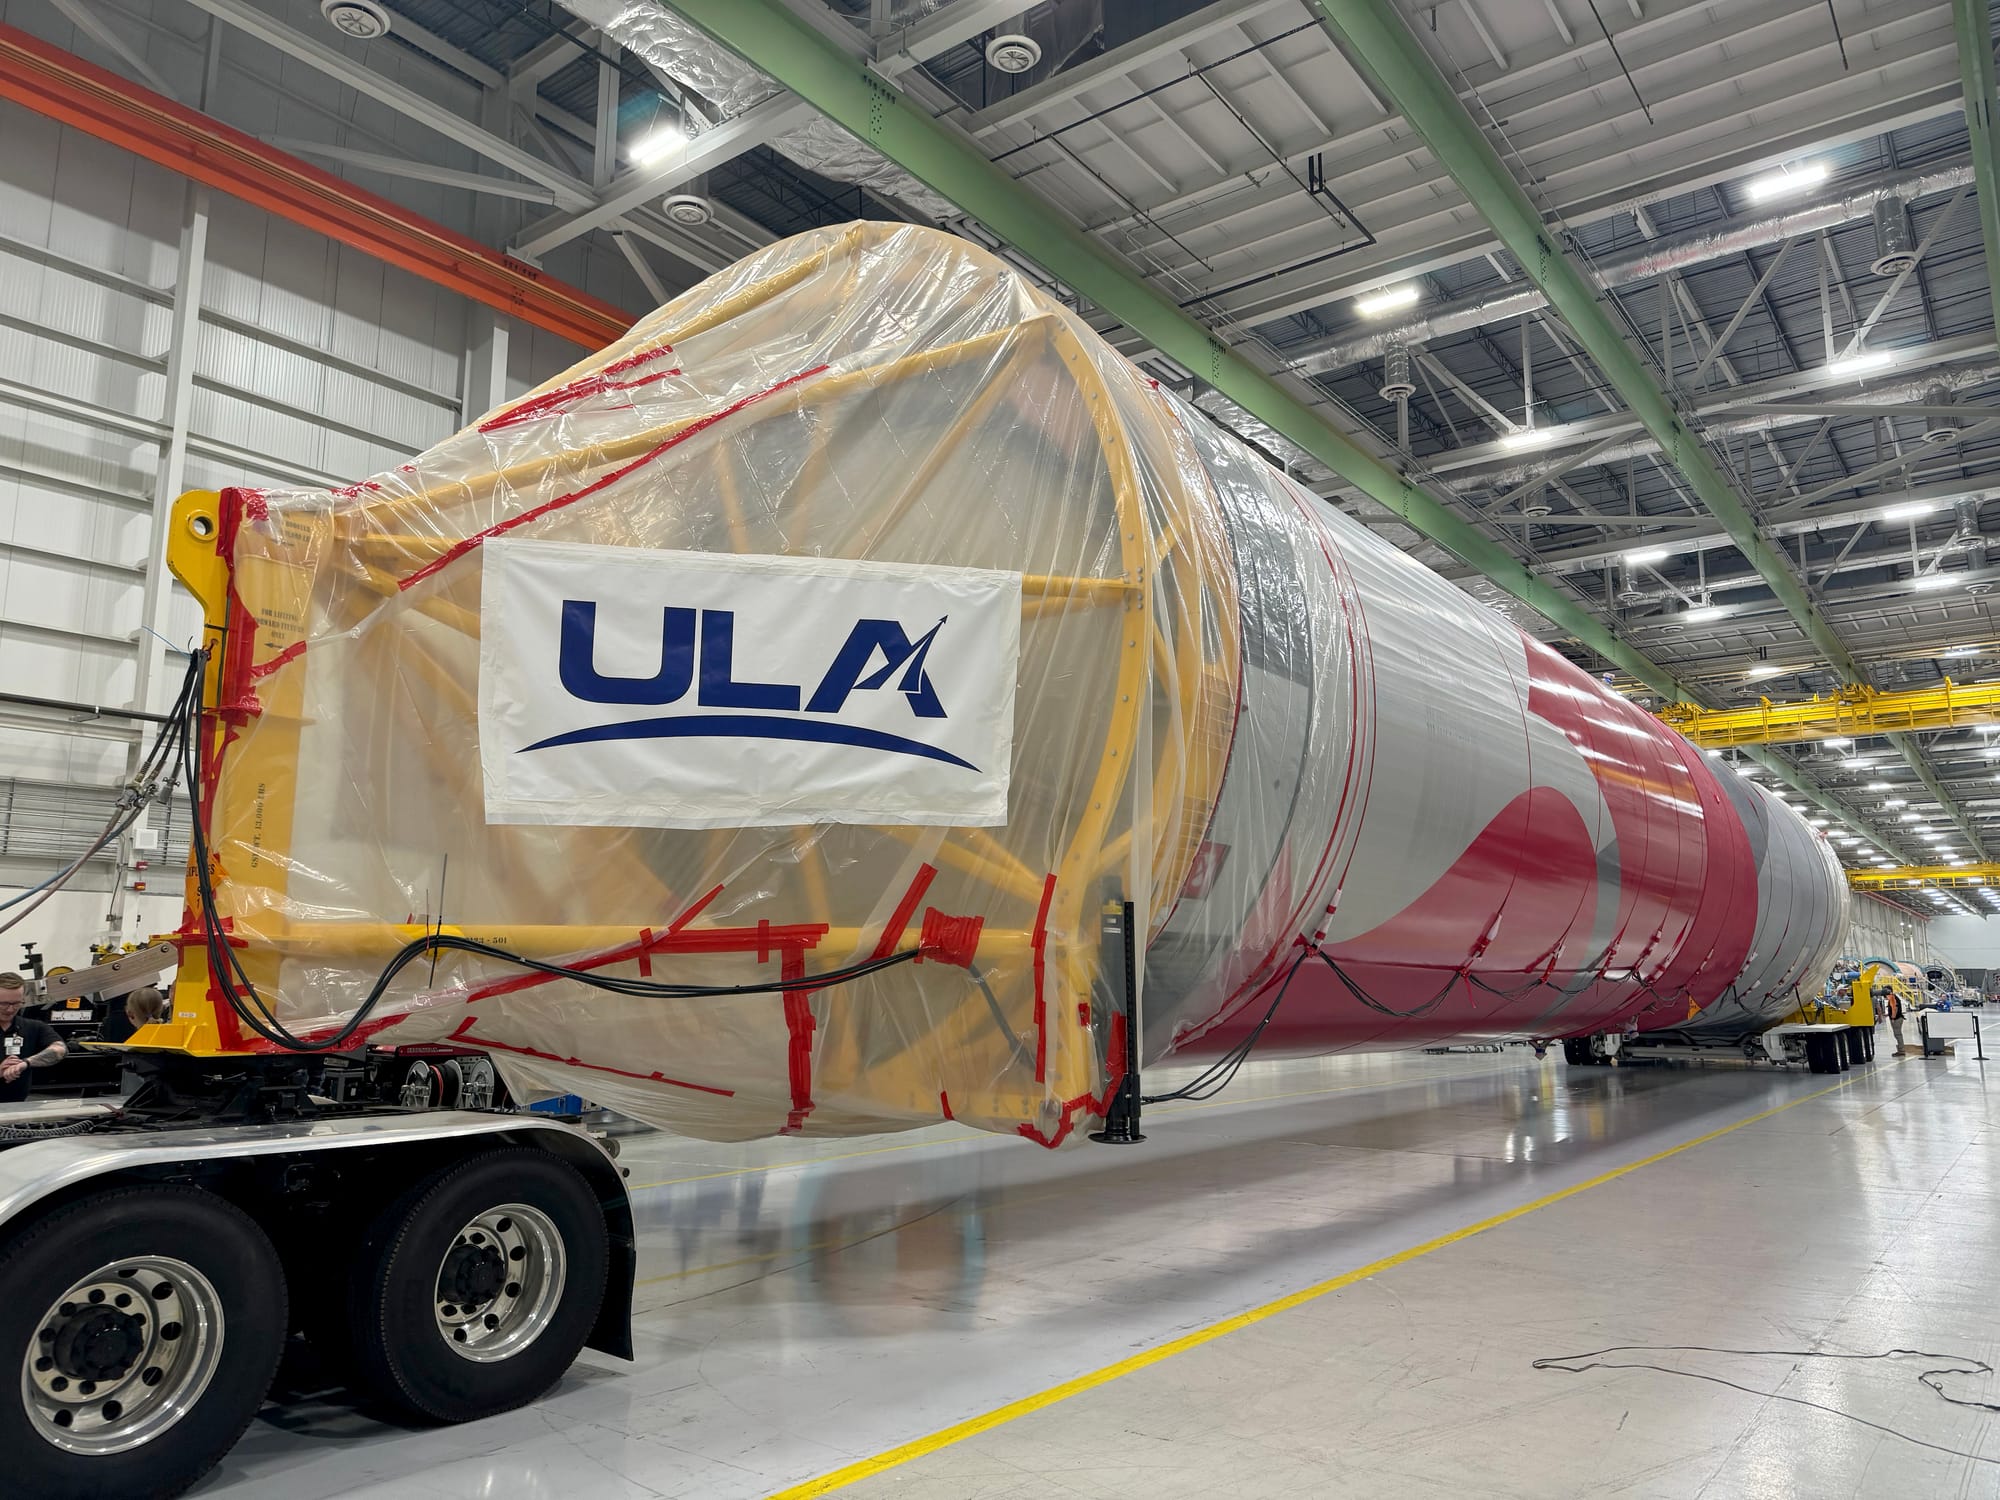 The Vulcan Cert-2 mission booster ahead of departure from United Launch Alliance's factory in Decatur, Alabama. ©United Launch Alliance